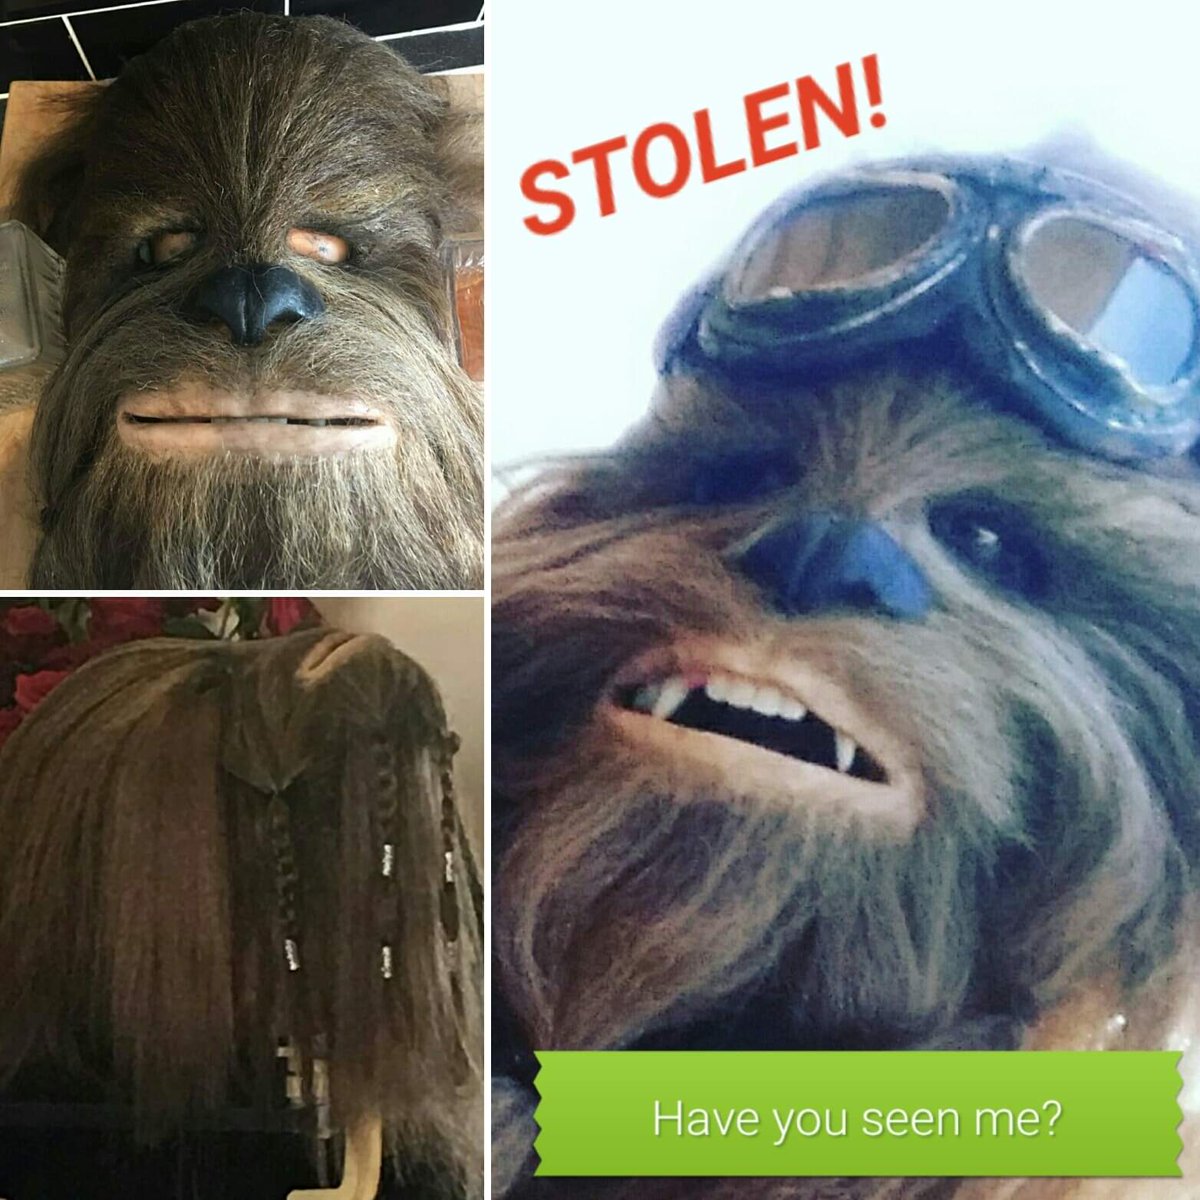 URGENT HELP JokerSquadUK have had their Namba mask taken while at the For the Love of Sci Fi convention this weekend. To whoever has stolen it please return it.This is funded out of someone's own money and is used to raise money #StarWars #Namba #JokerSquadUk #Fortheloveofscifi